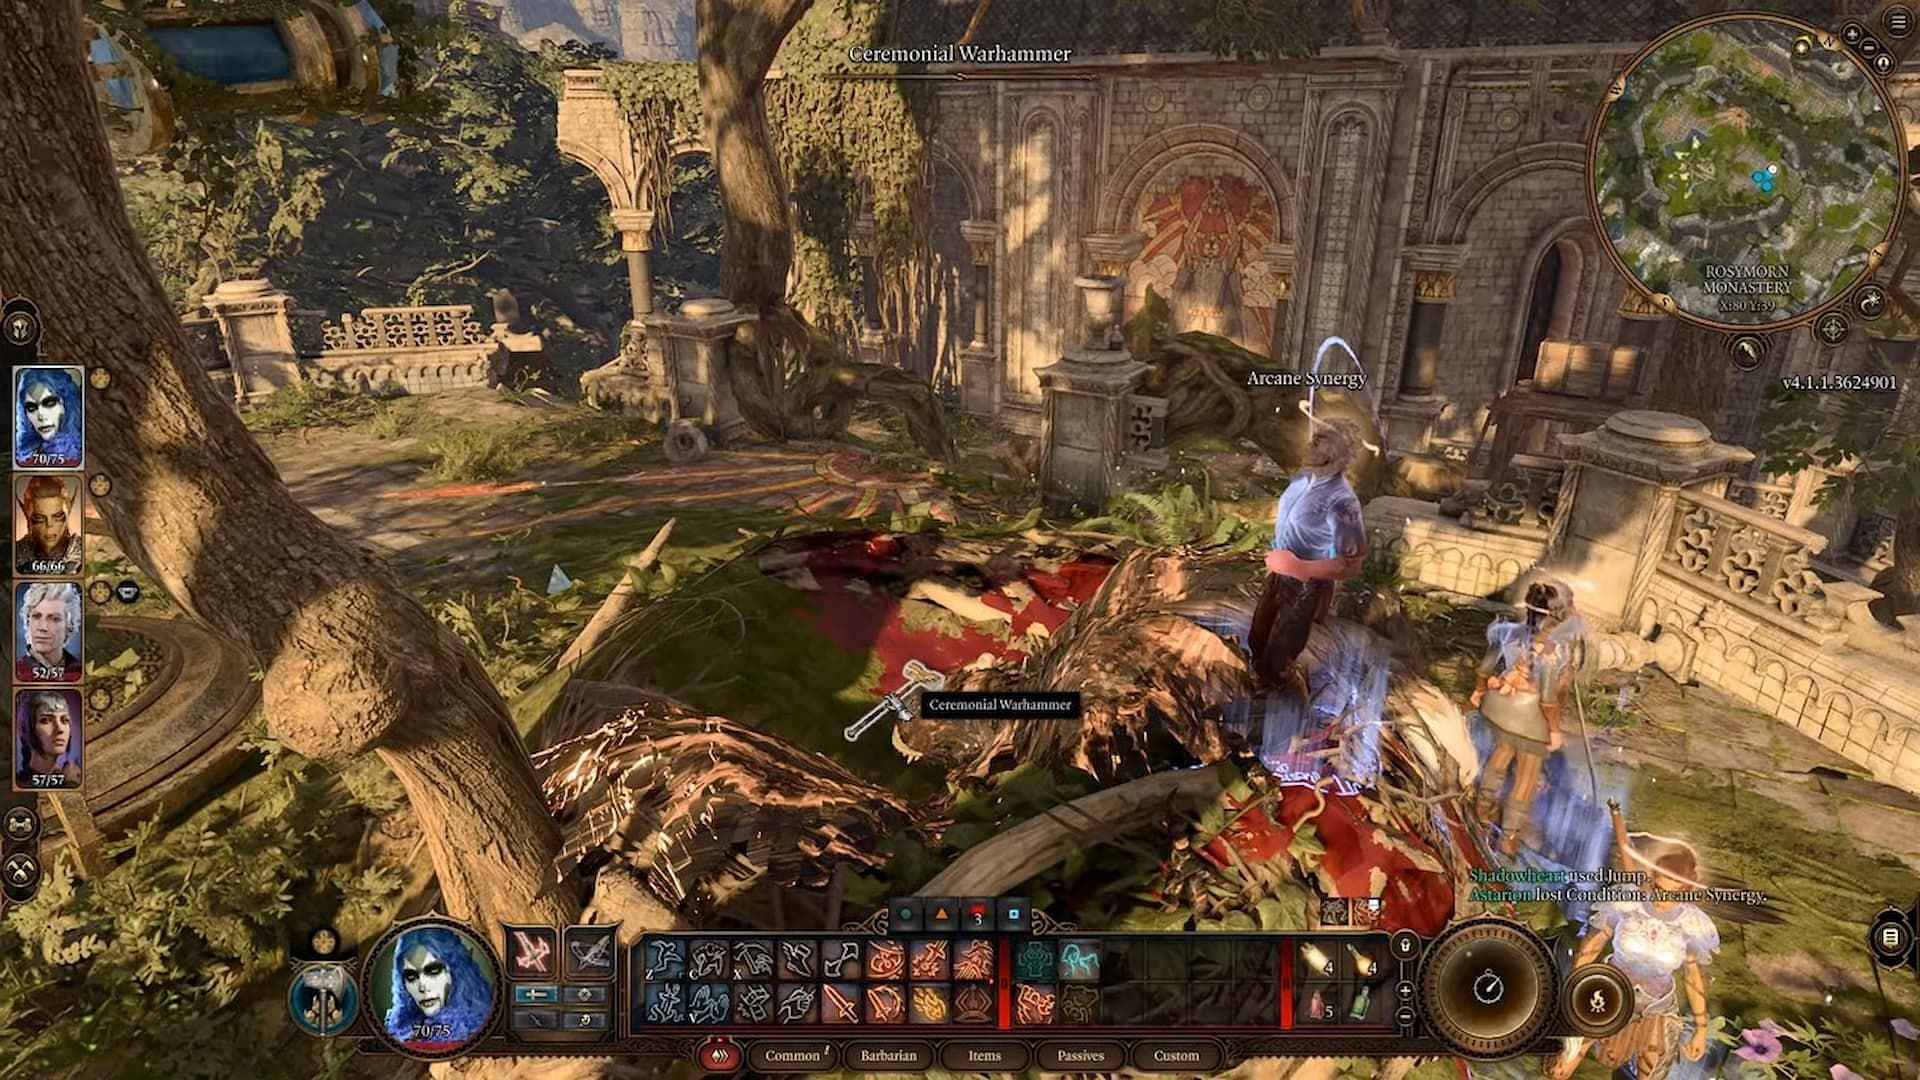 Find the Ceremonial Warhammer in the eagle&#039;s nest (Image via Larian Studios)